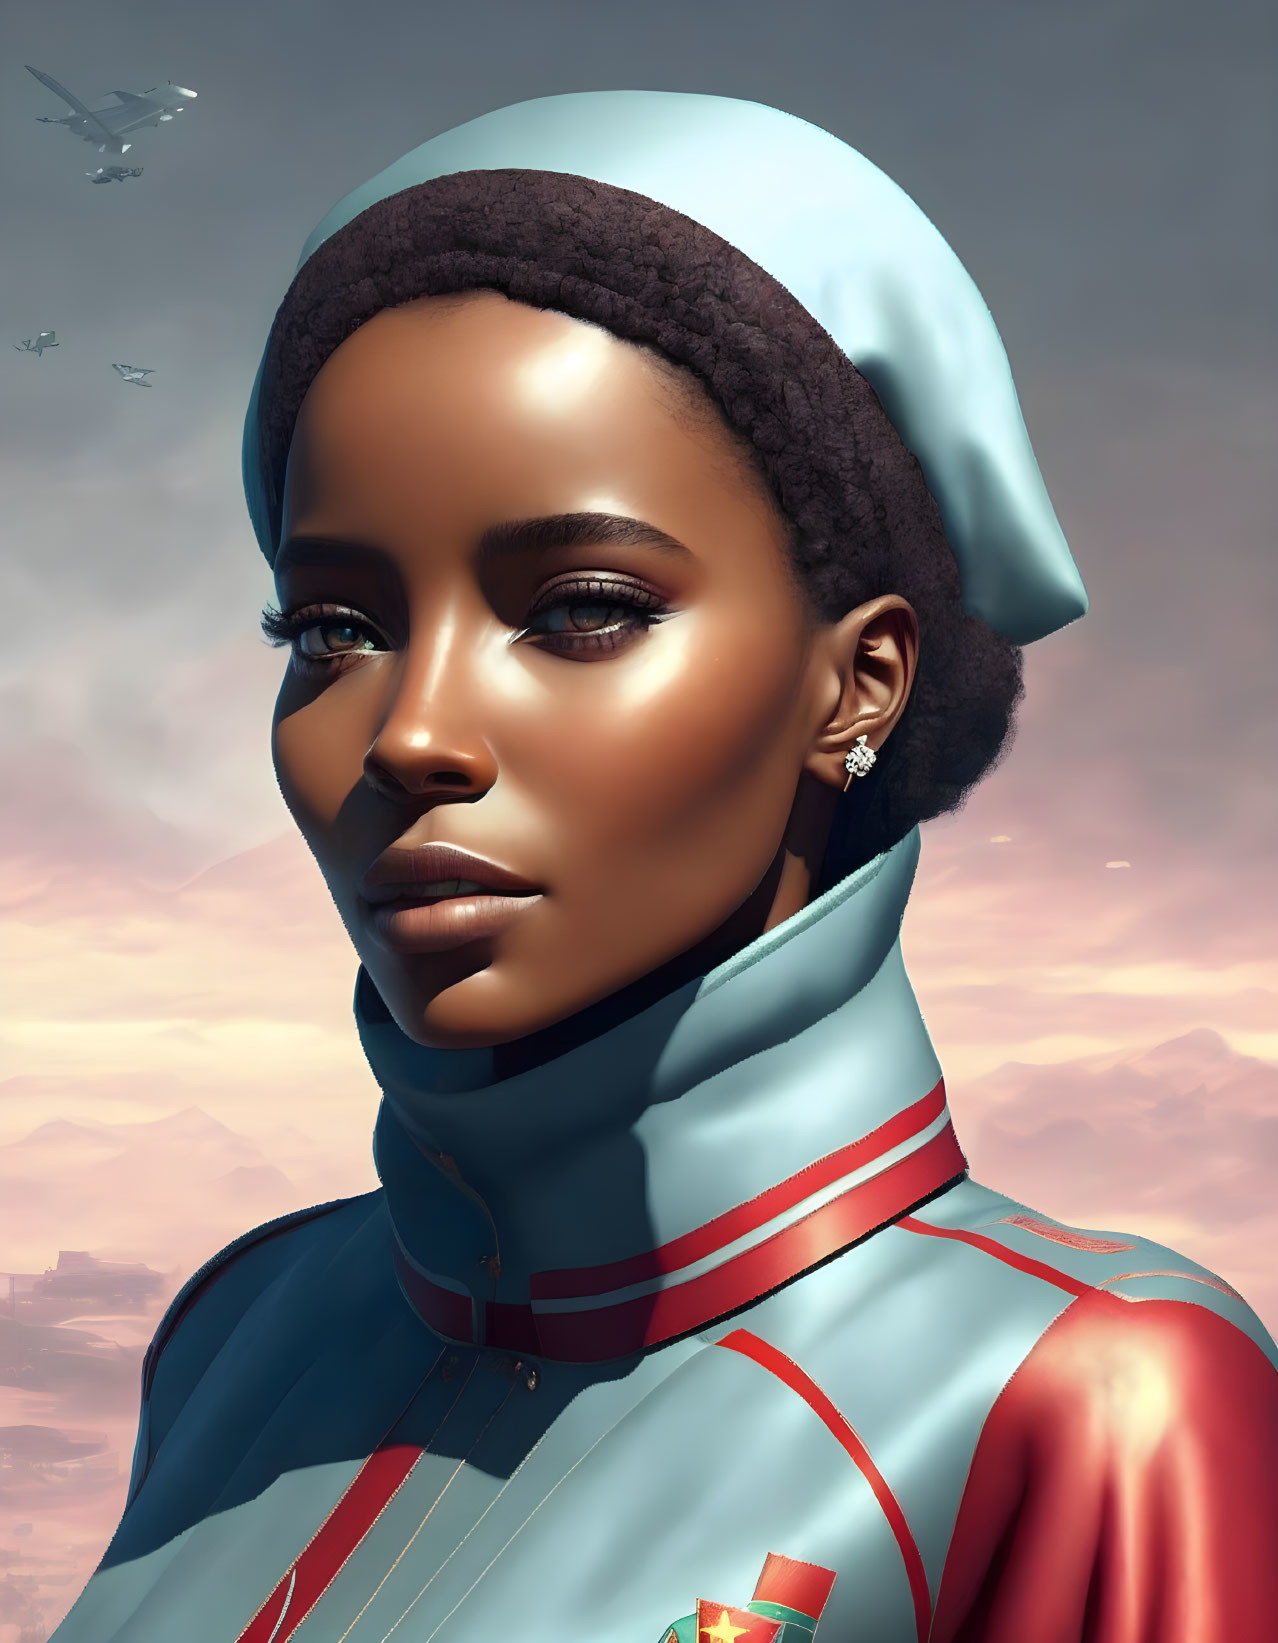 Digital portrait of woman in futuristic blue uniform with red trim against sky with flying crafts.